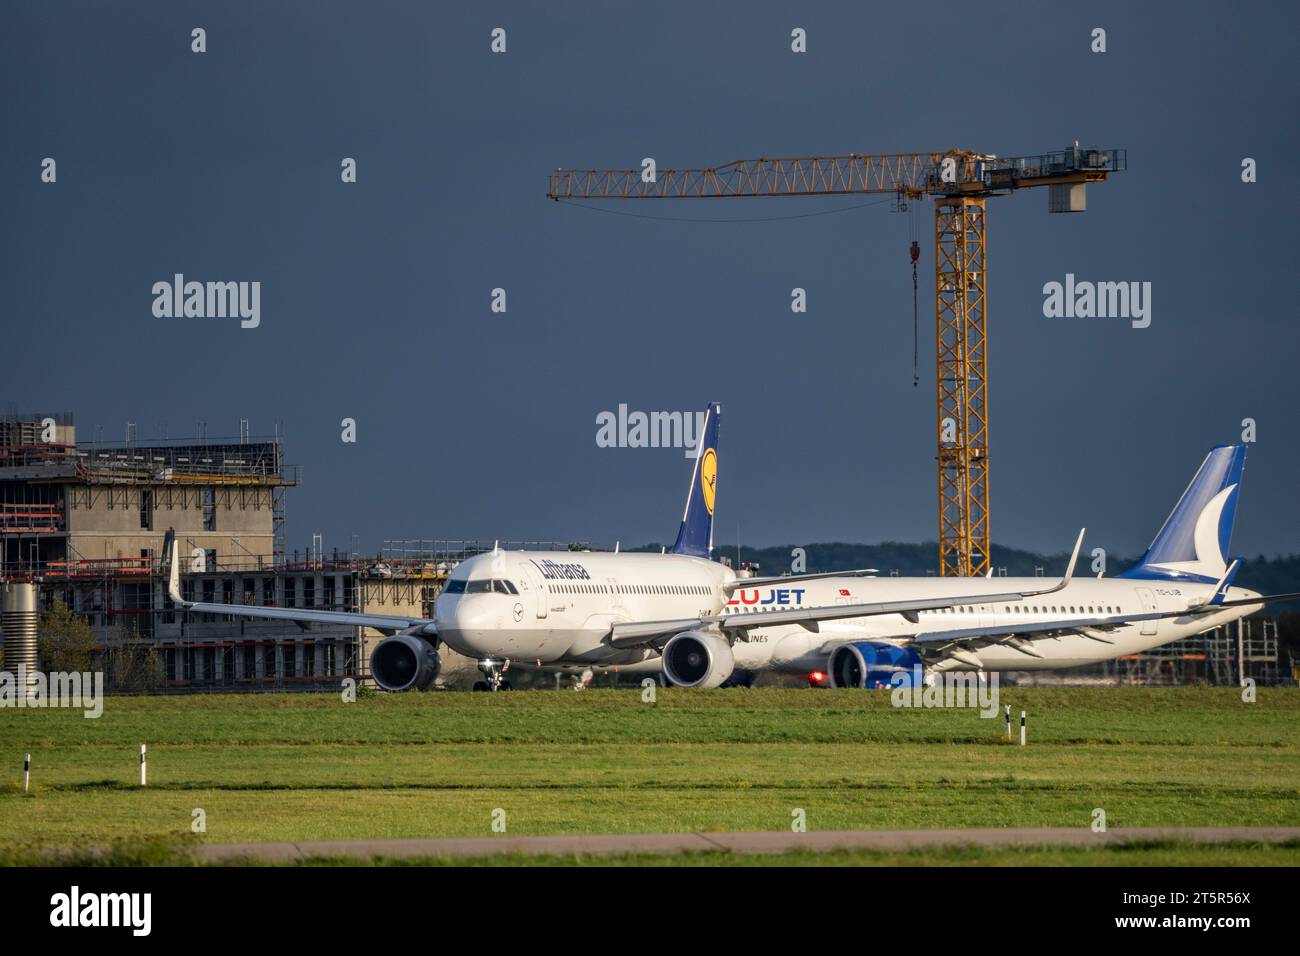 Lufthansa Airbus on the taxiway for take-off at Düsseldorf International Airport, Anadolujet, Stock Photo